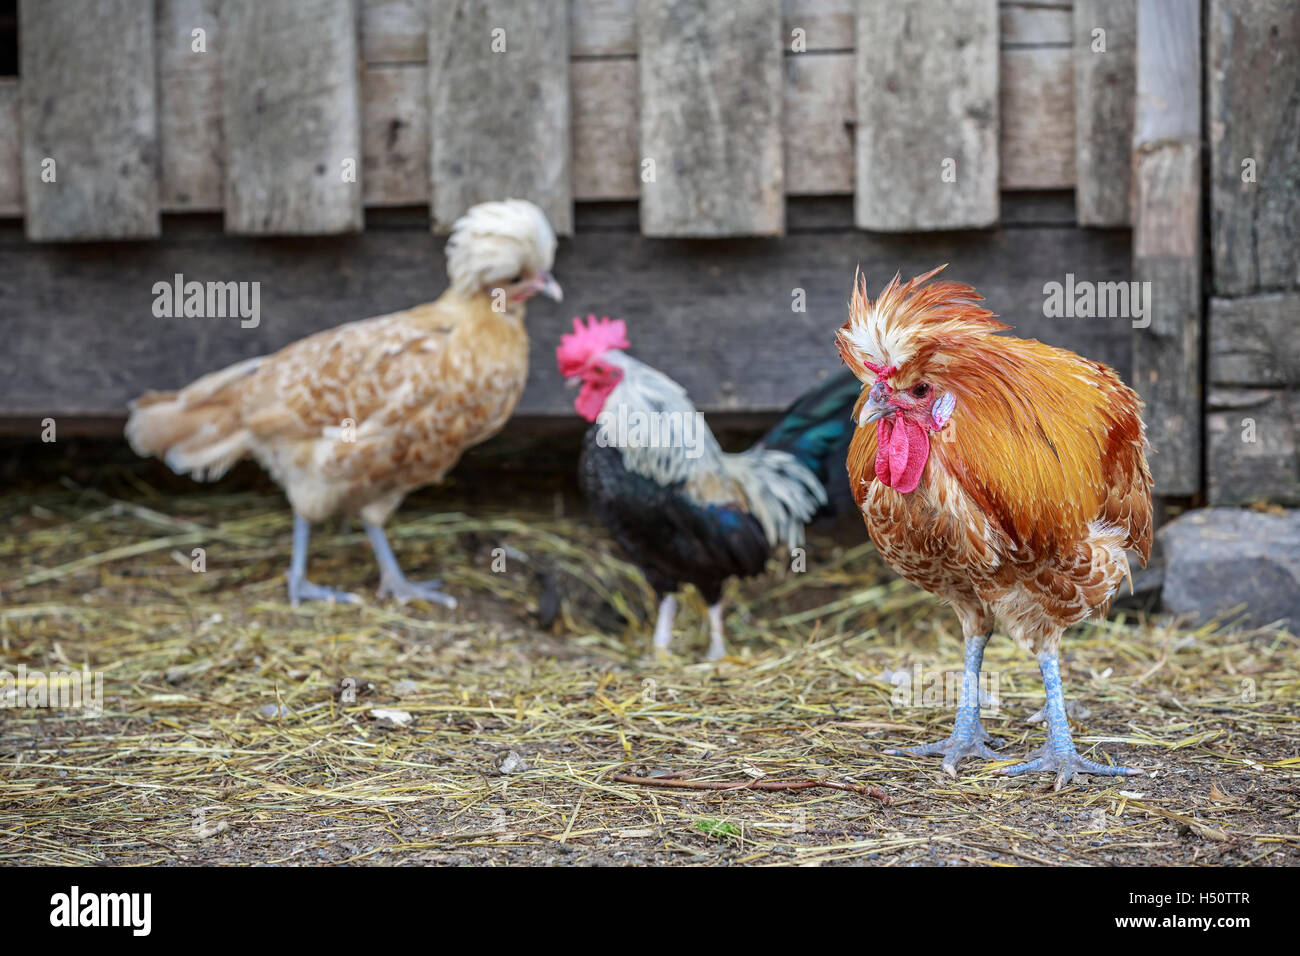 A variety of chickens in a barnyard Stock Photo